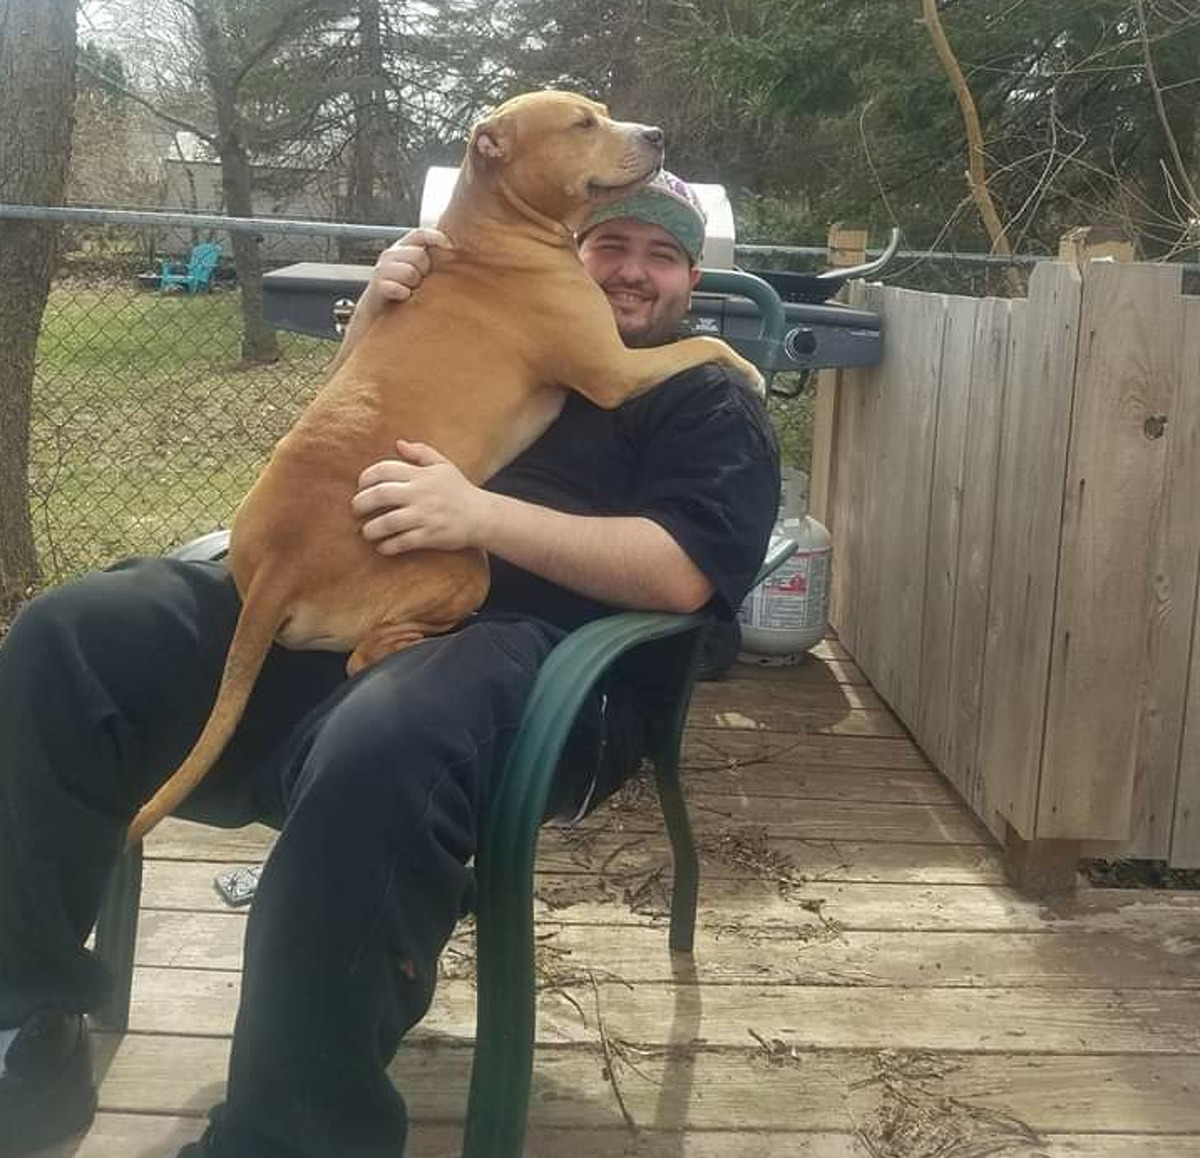 Salvatore DiNovo in an undated photograph with one of the two dogs he owns that Schenectady police said attacked his niece at their home on Clayton Road in Schenectady.